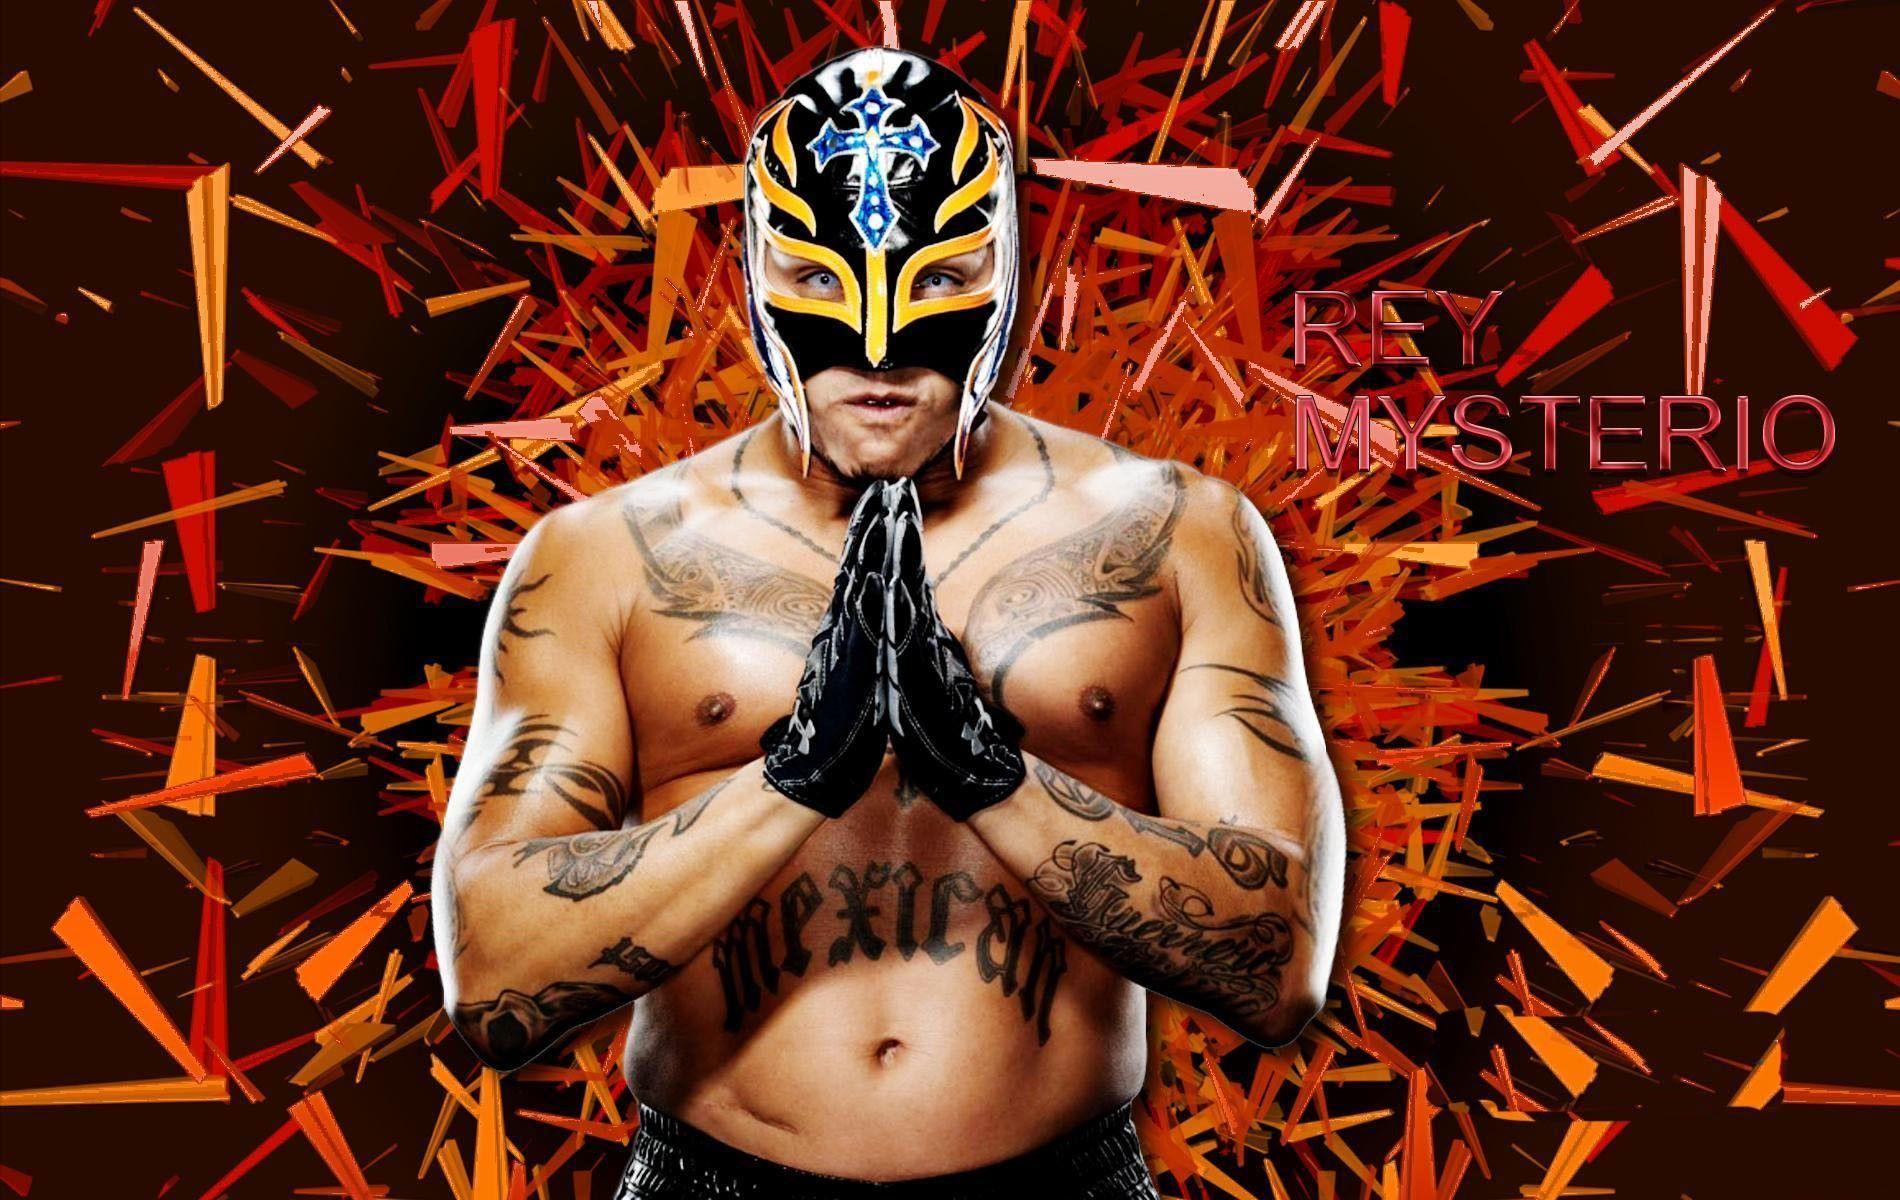 Rey Mysterio 2016 Full HD Wallpapers - Wallpaper Cave